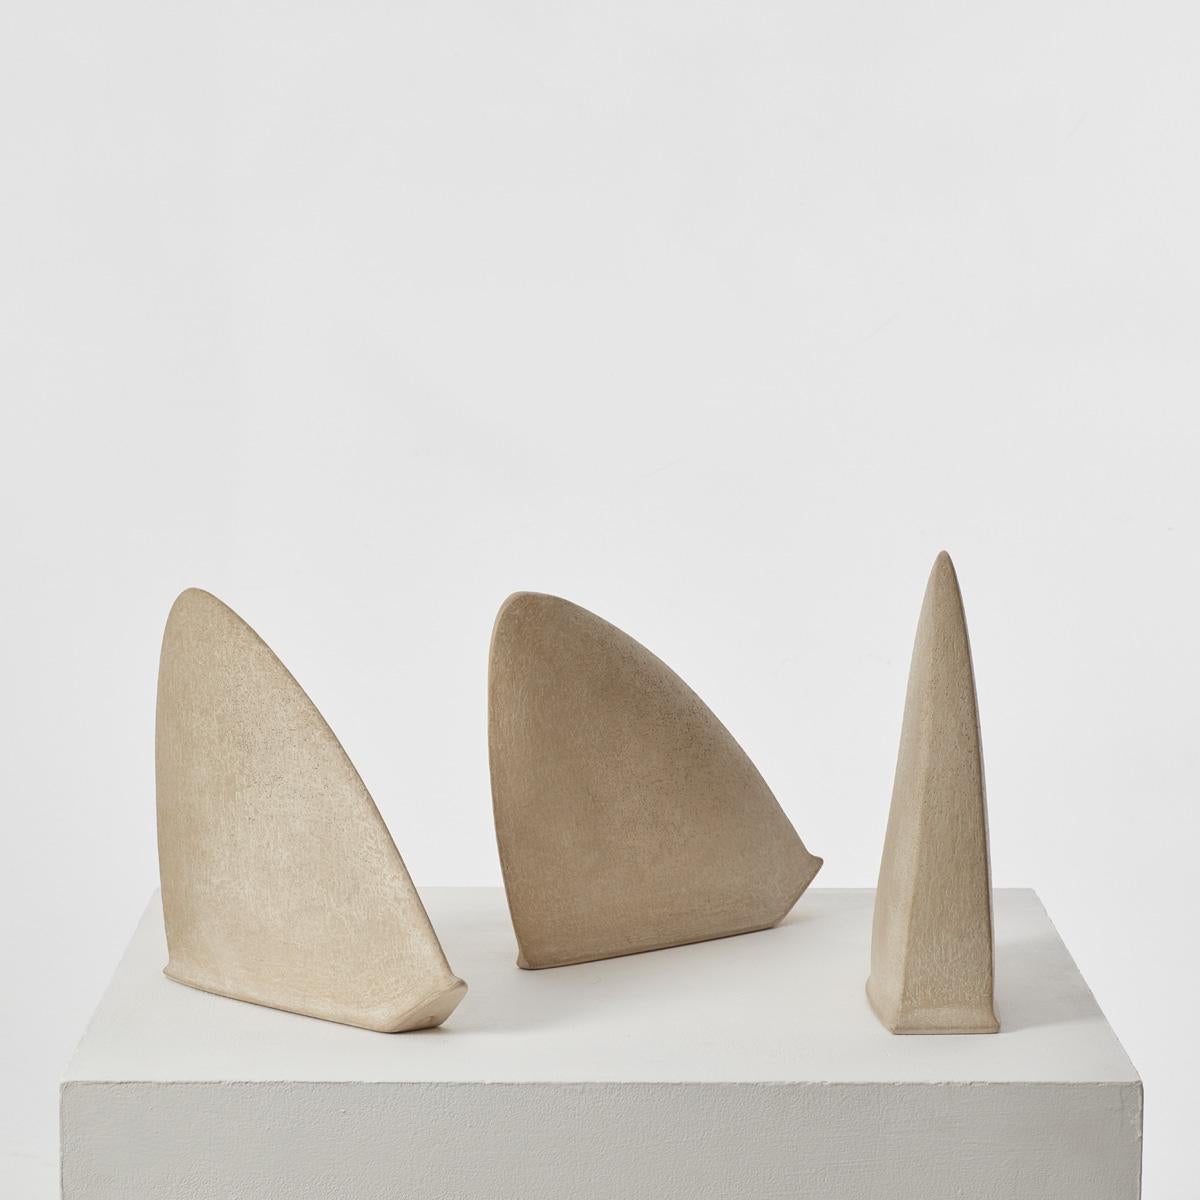 British Set of Three ‘Shark Fin’ Sculptures from the Collection of Sir Terence Conran For Sale